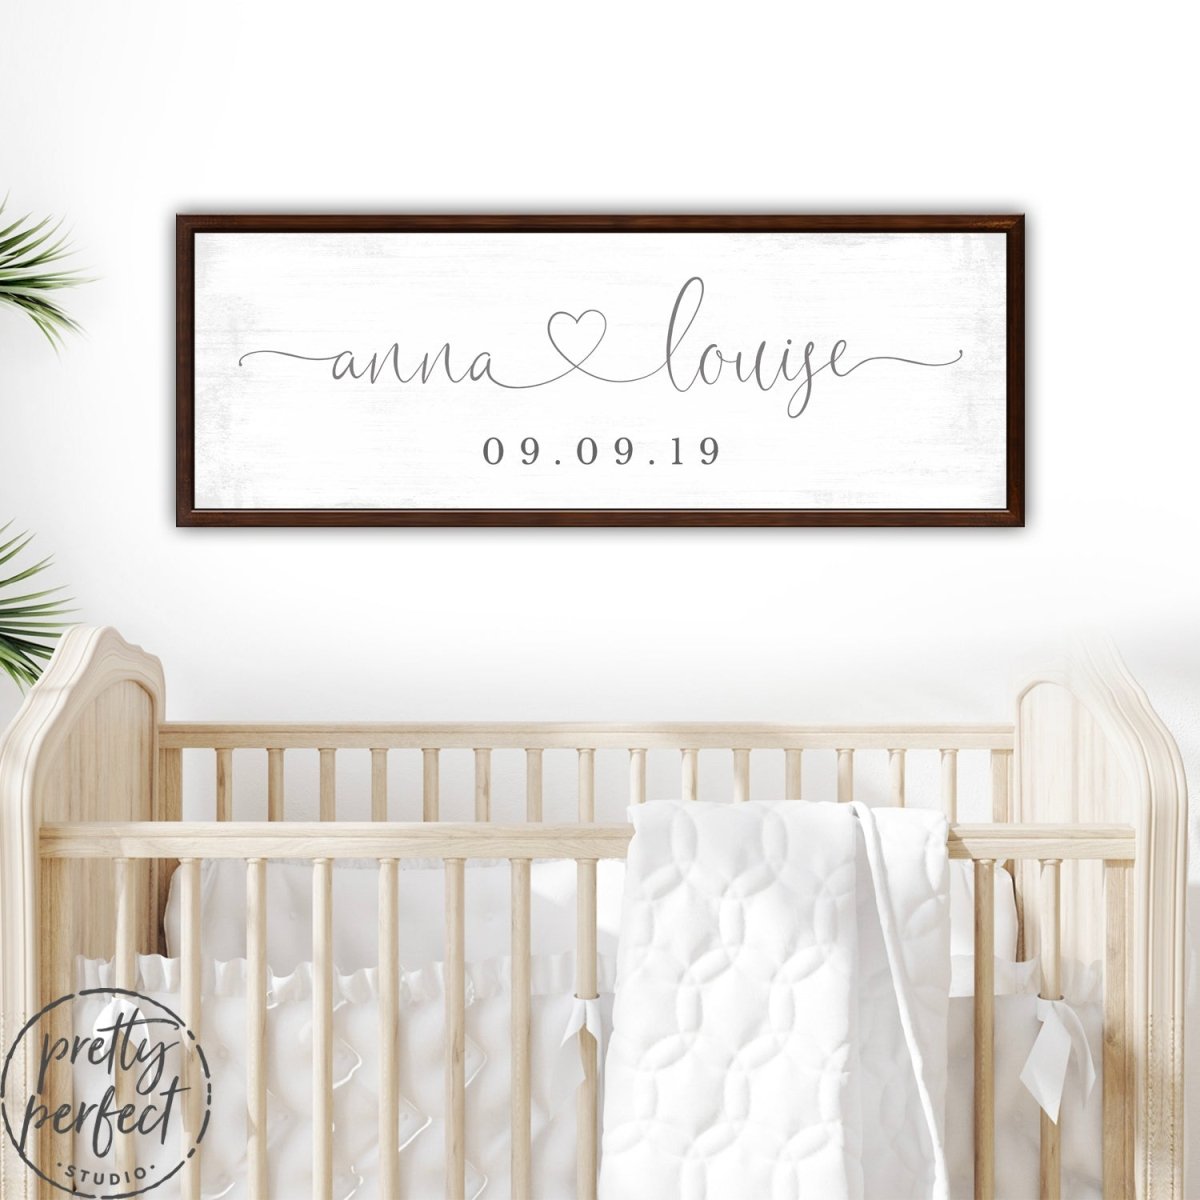 Boy or Girl Personalized Name Sign for the Nursery Room Above Crib - Pretty Perfect Studio